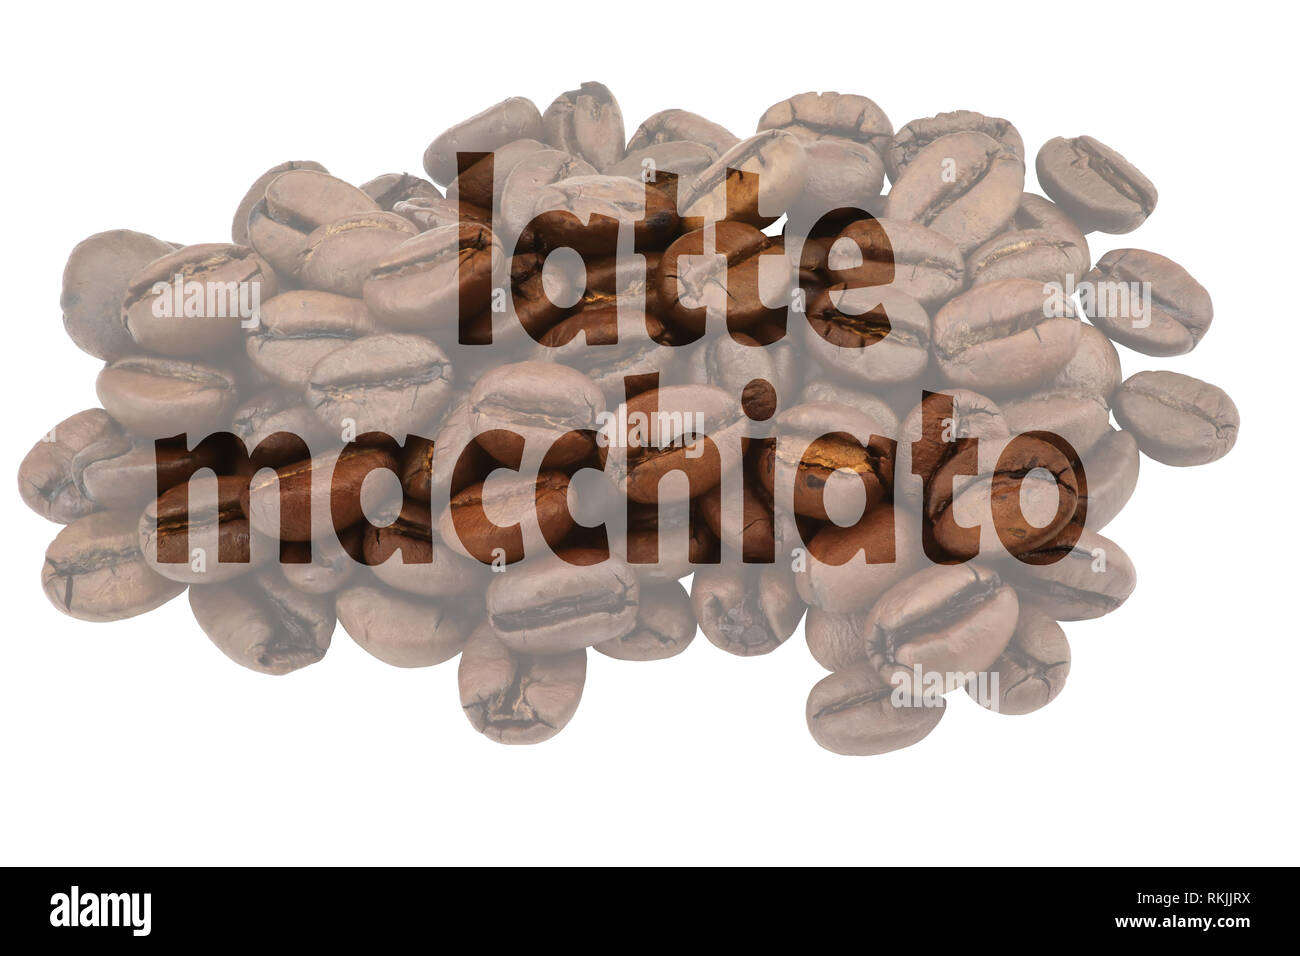 Image with highlighted text latte macchiato against pale background of coffee beans Stock Photo